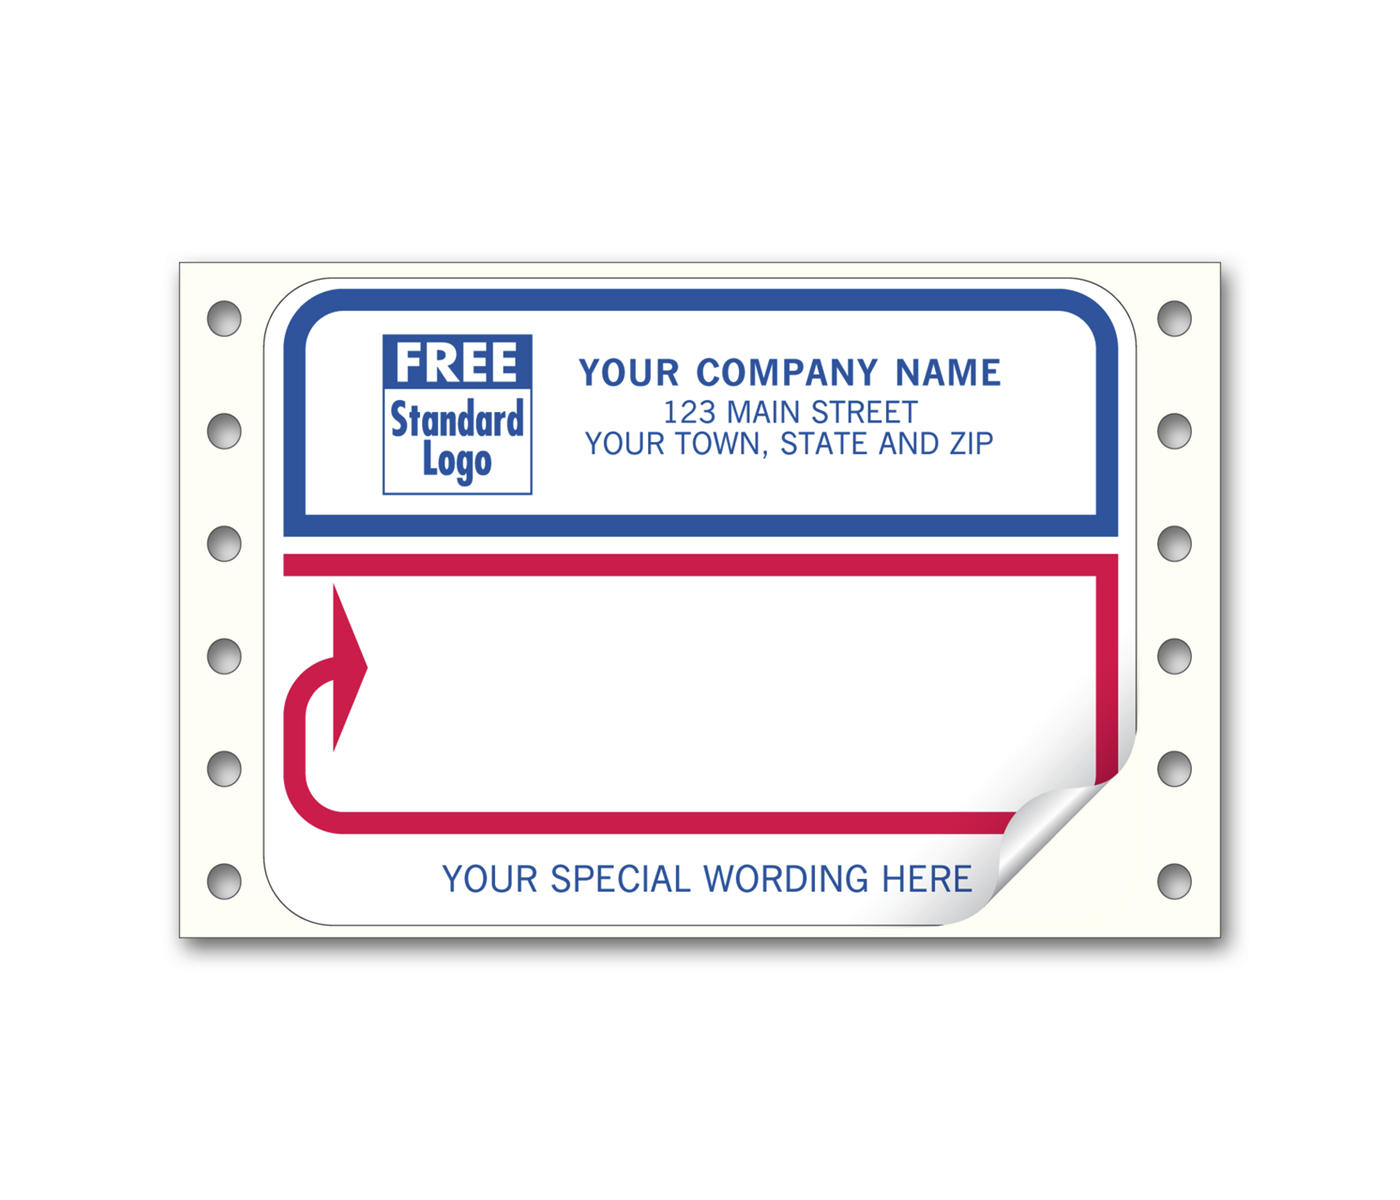 Mailing Labels, Continuous, White with Blue/Red Borders